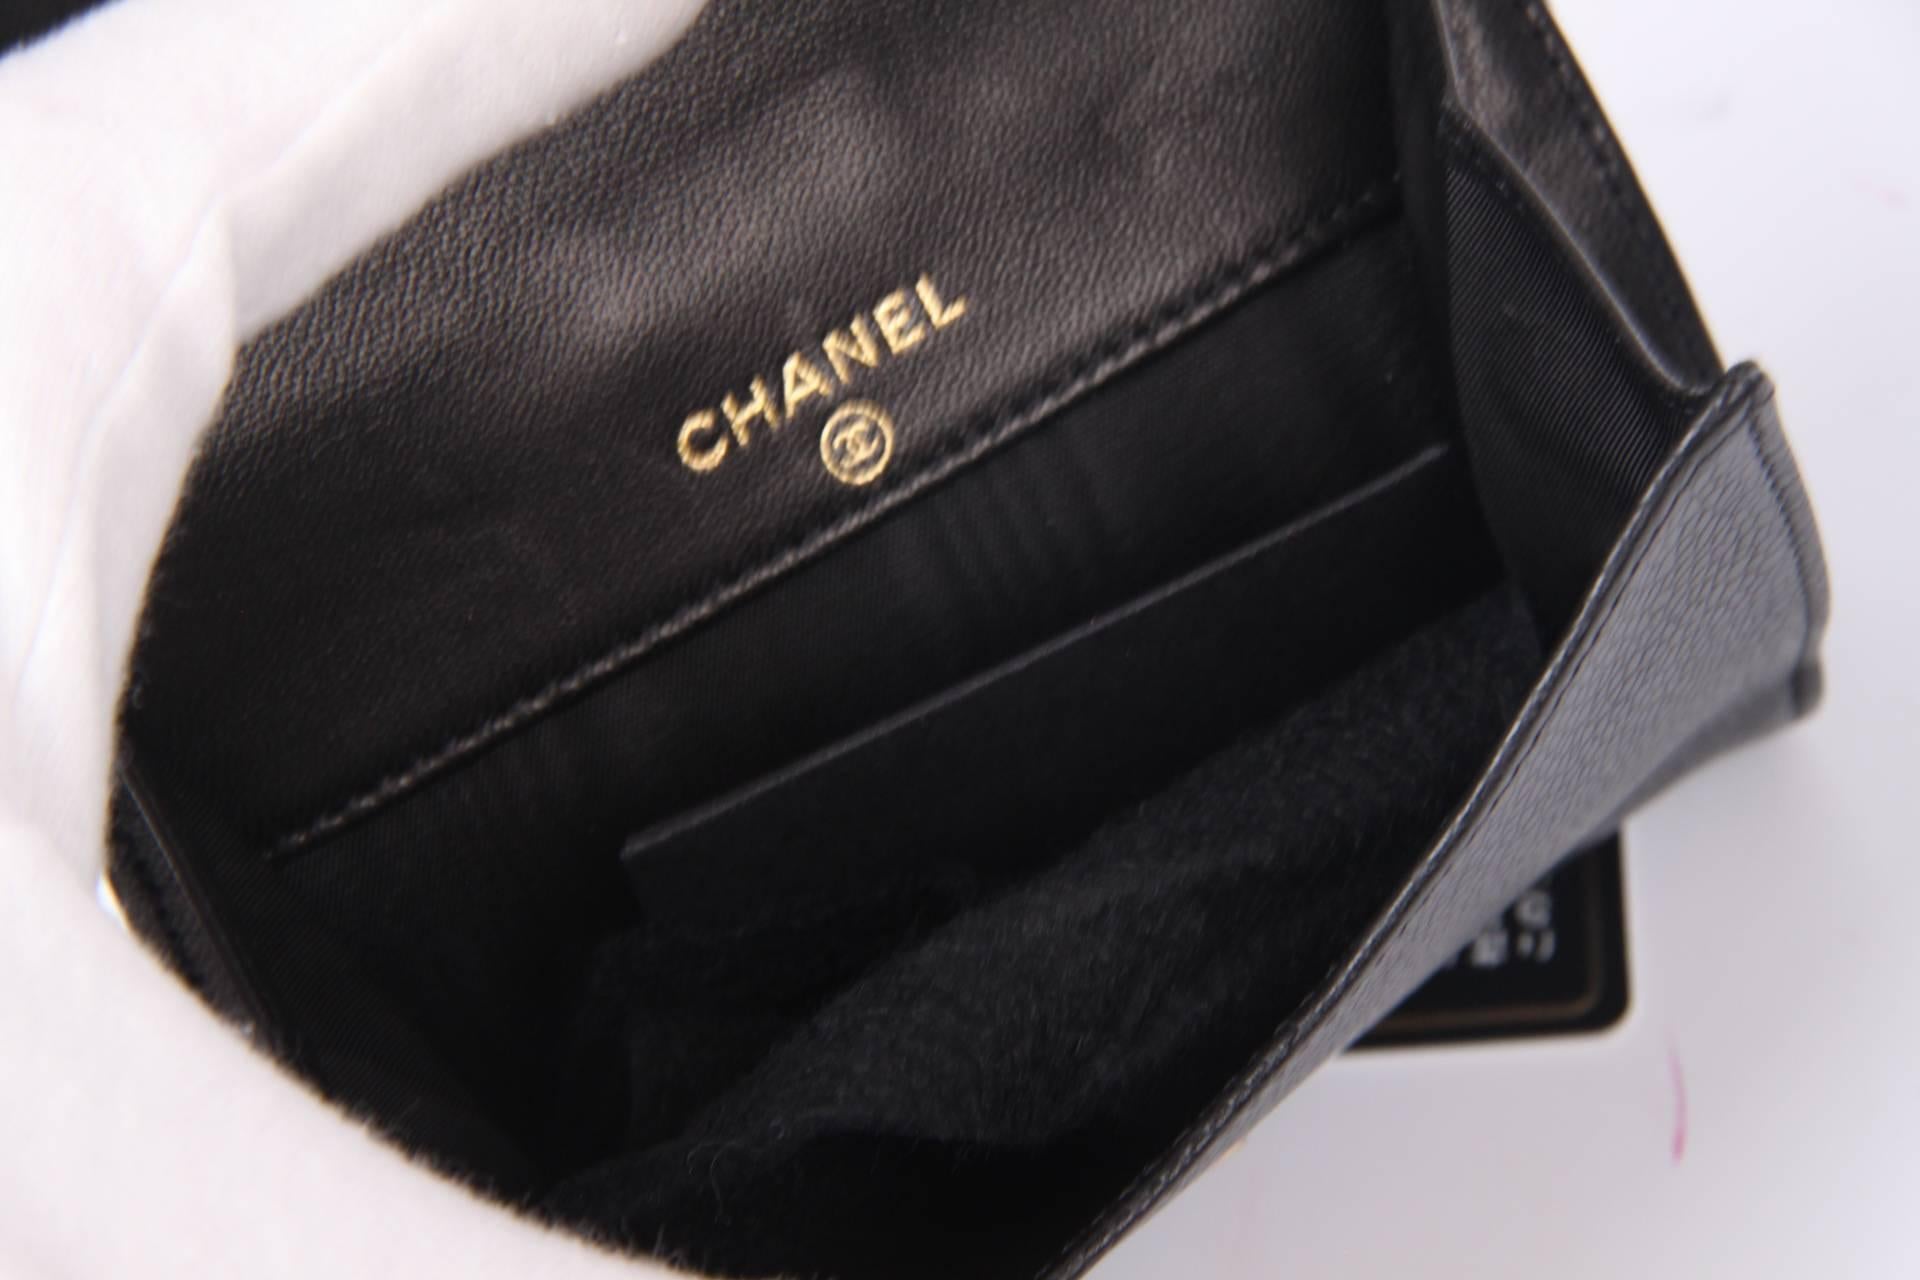 A wallet in a handy size: the Chanel Caviar CC Billfold Wallet in black leather. Nice!

Fully crafted in black caviar leather, on the flap at the front a stitched CC logo. Underneath the flap you will find the coin compartment. On the back another